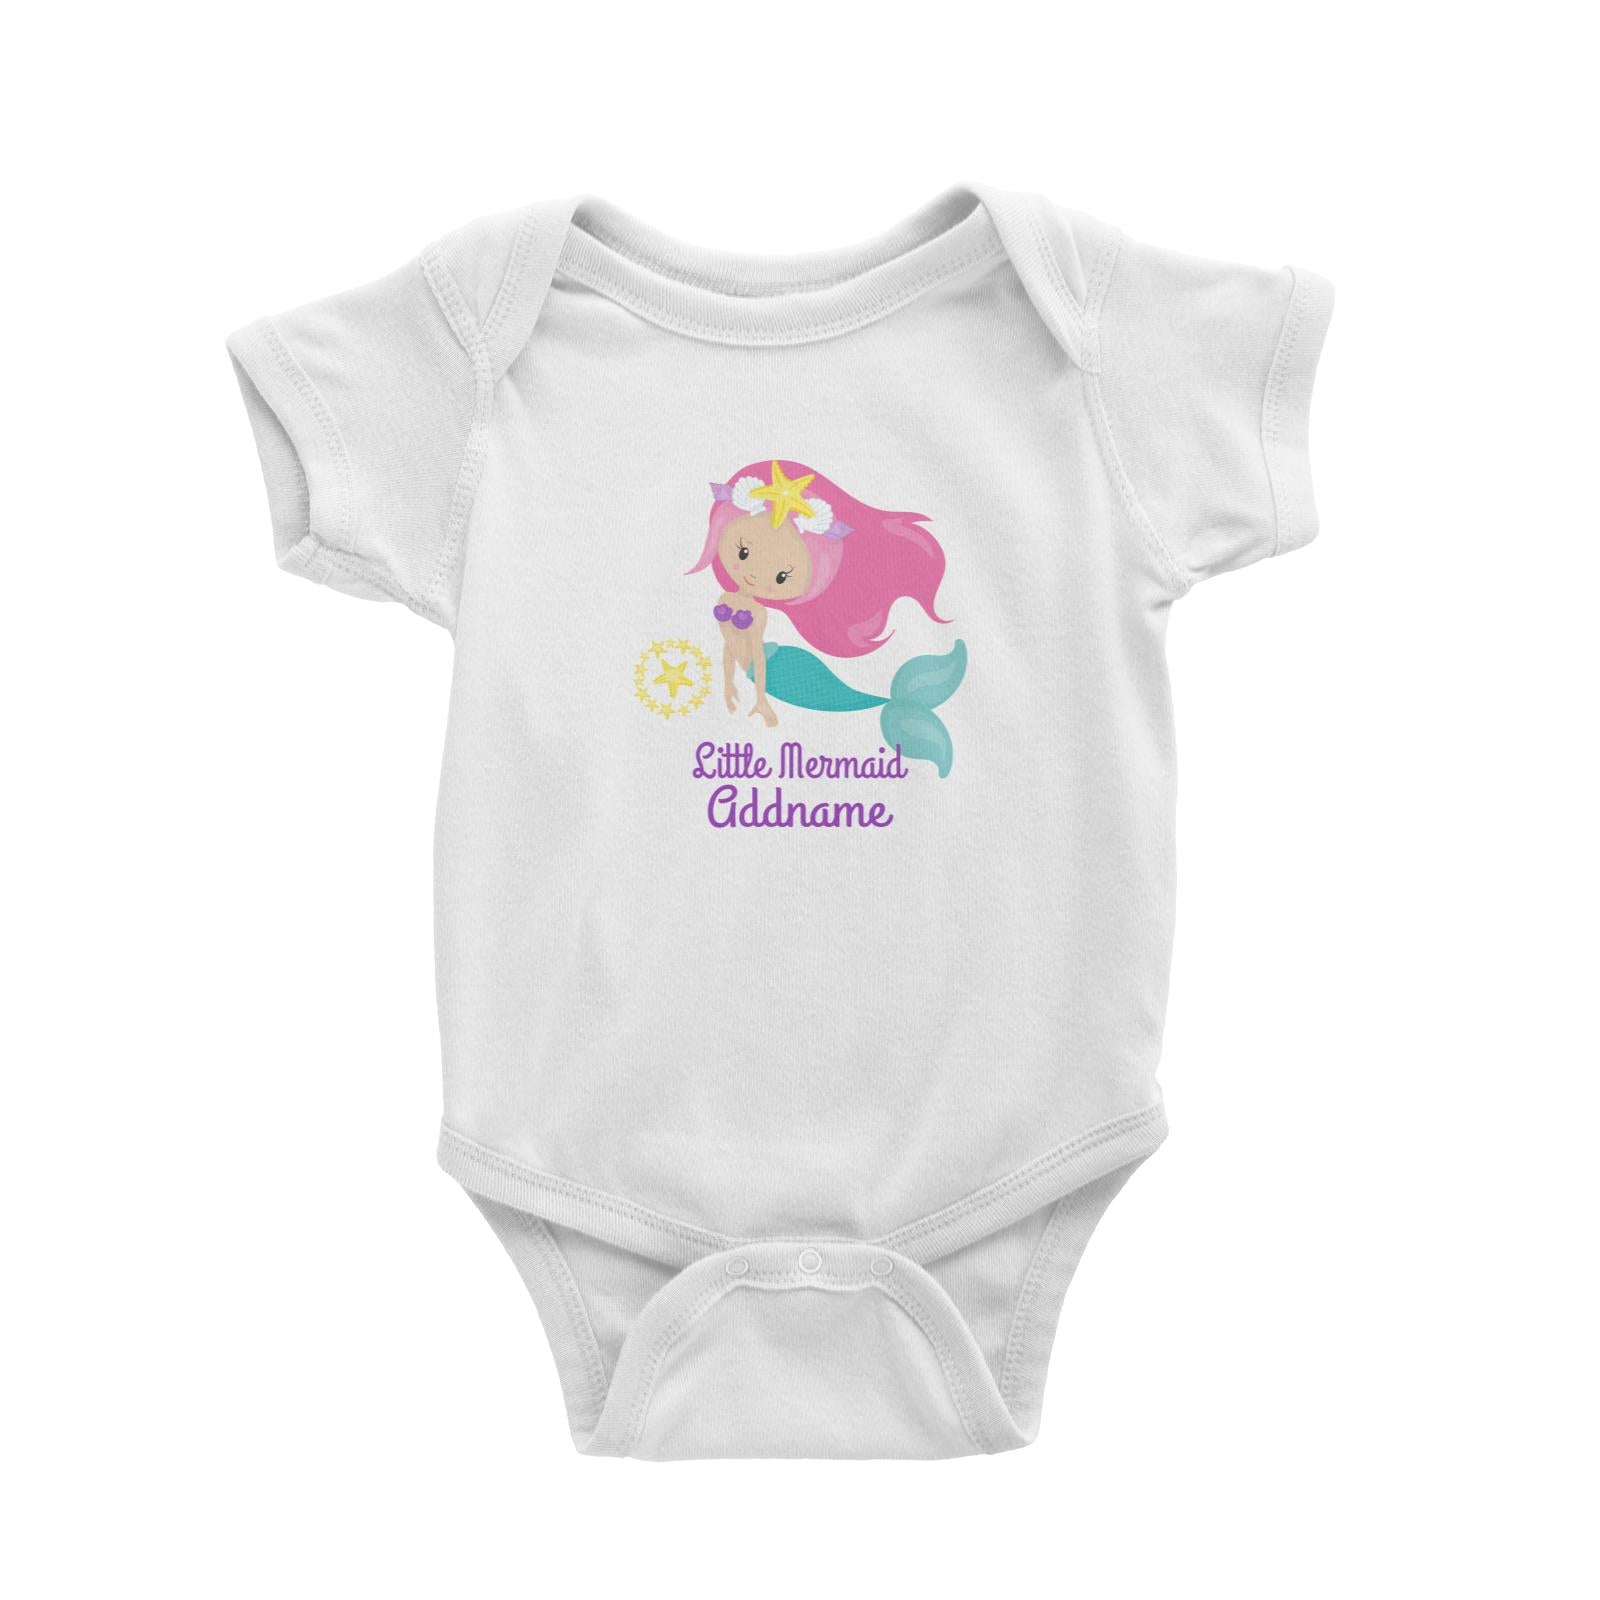 Little Mermaid Swimming with Starfish Emblem Addname White Baby Romper